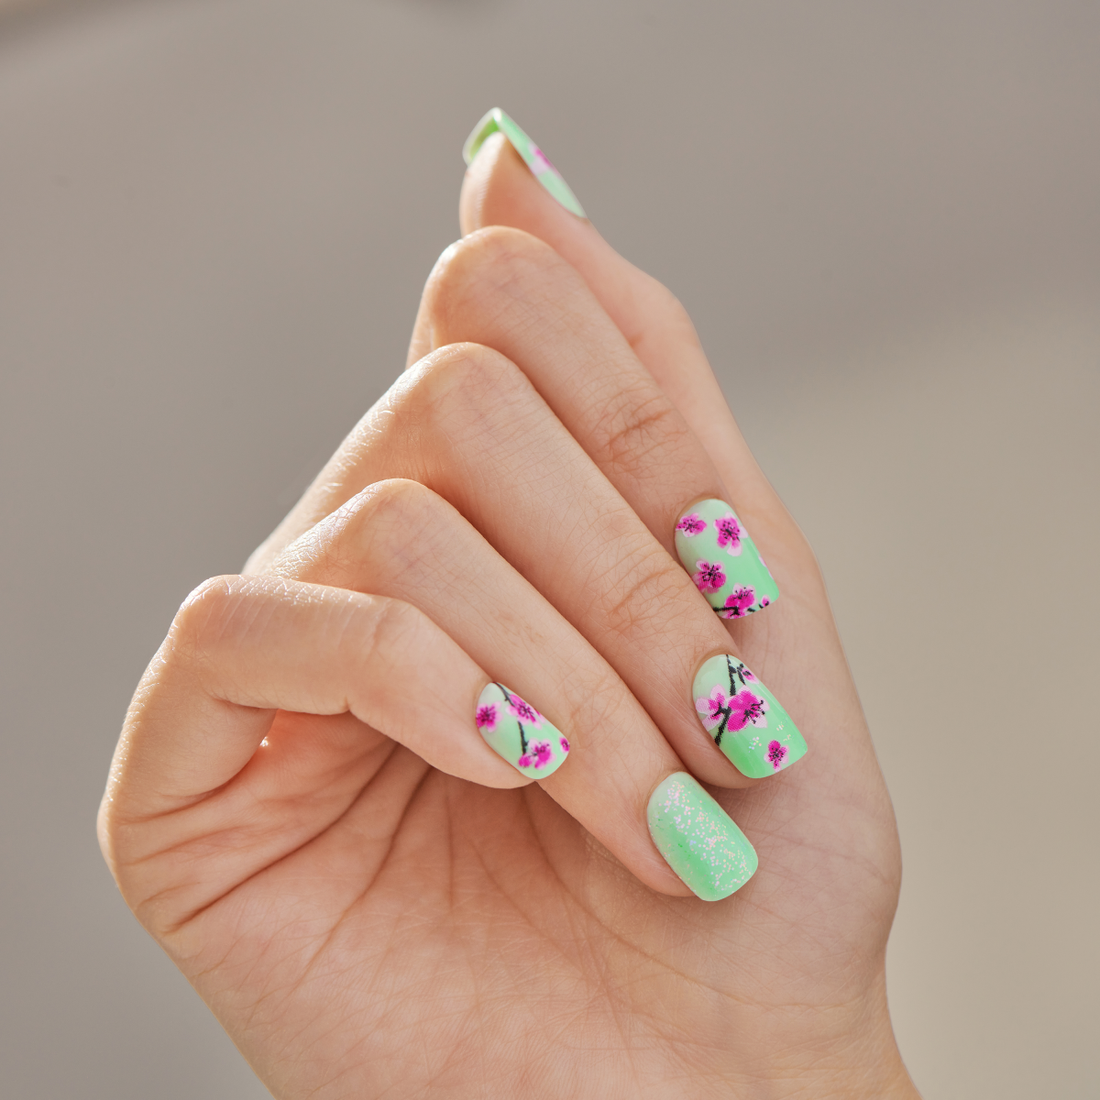 A hand displaying Arizona Tea X imPRESS nails with a green background and cherry blossom designs